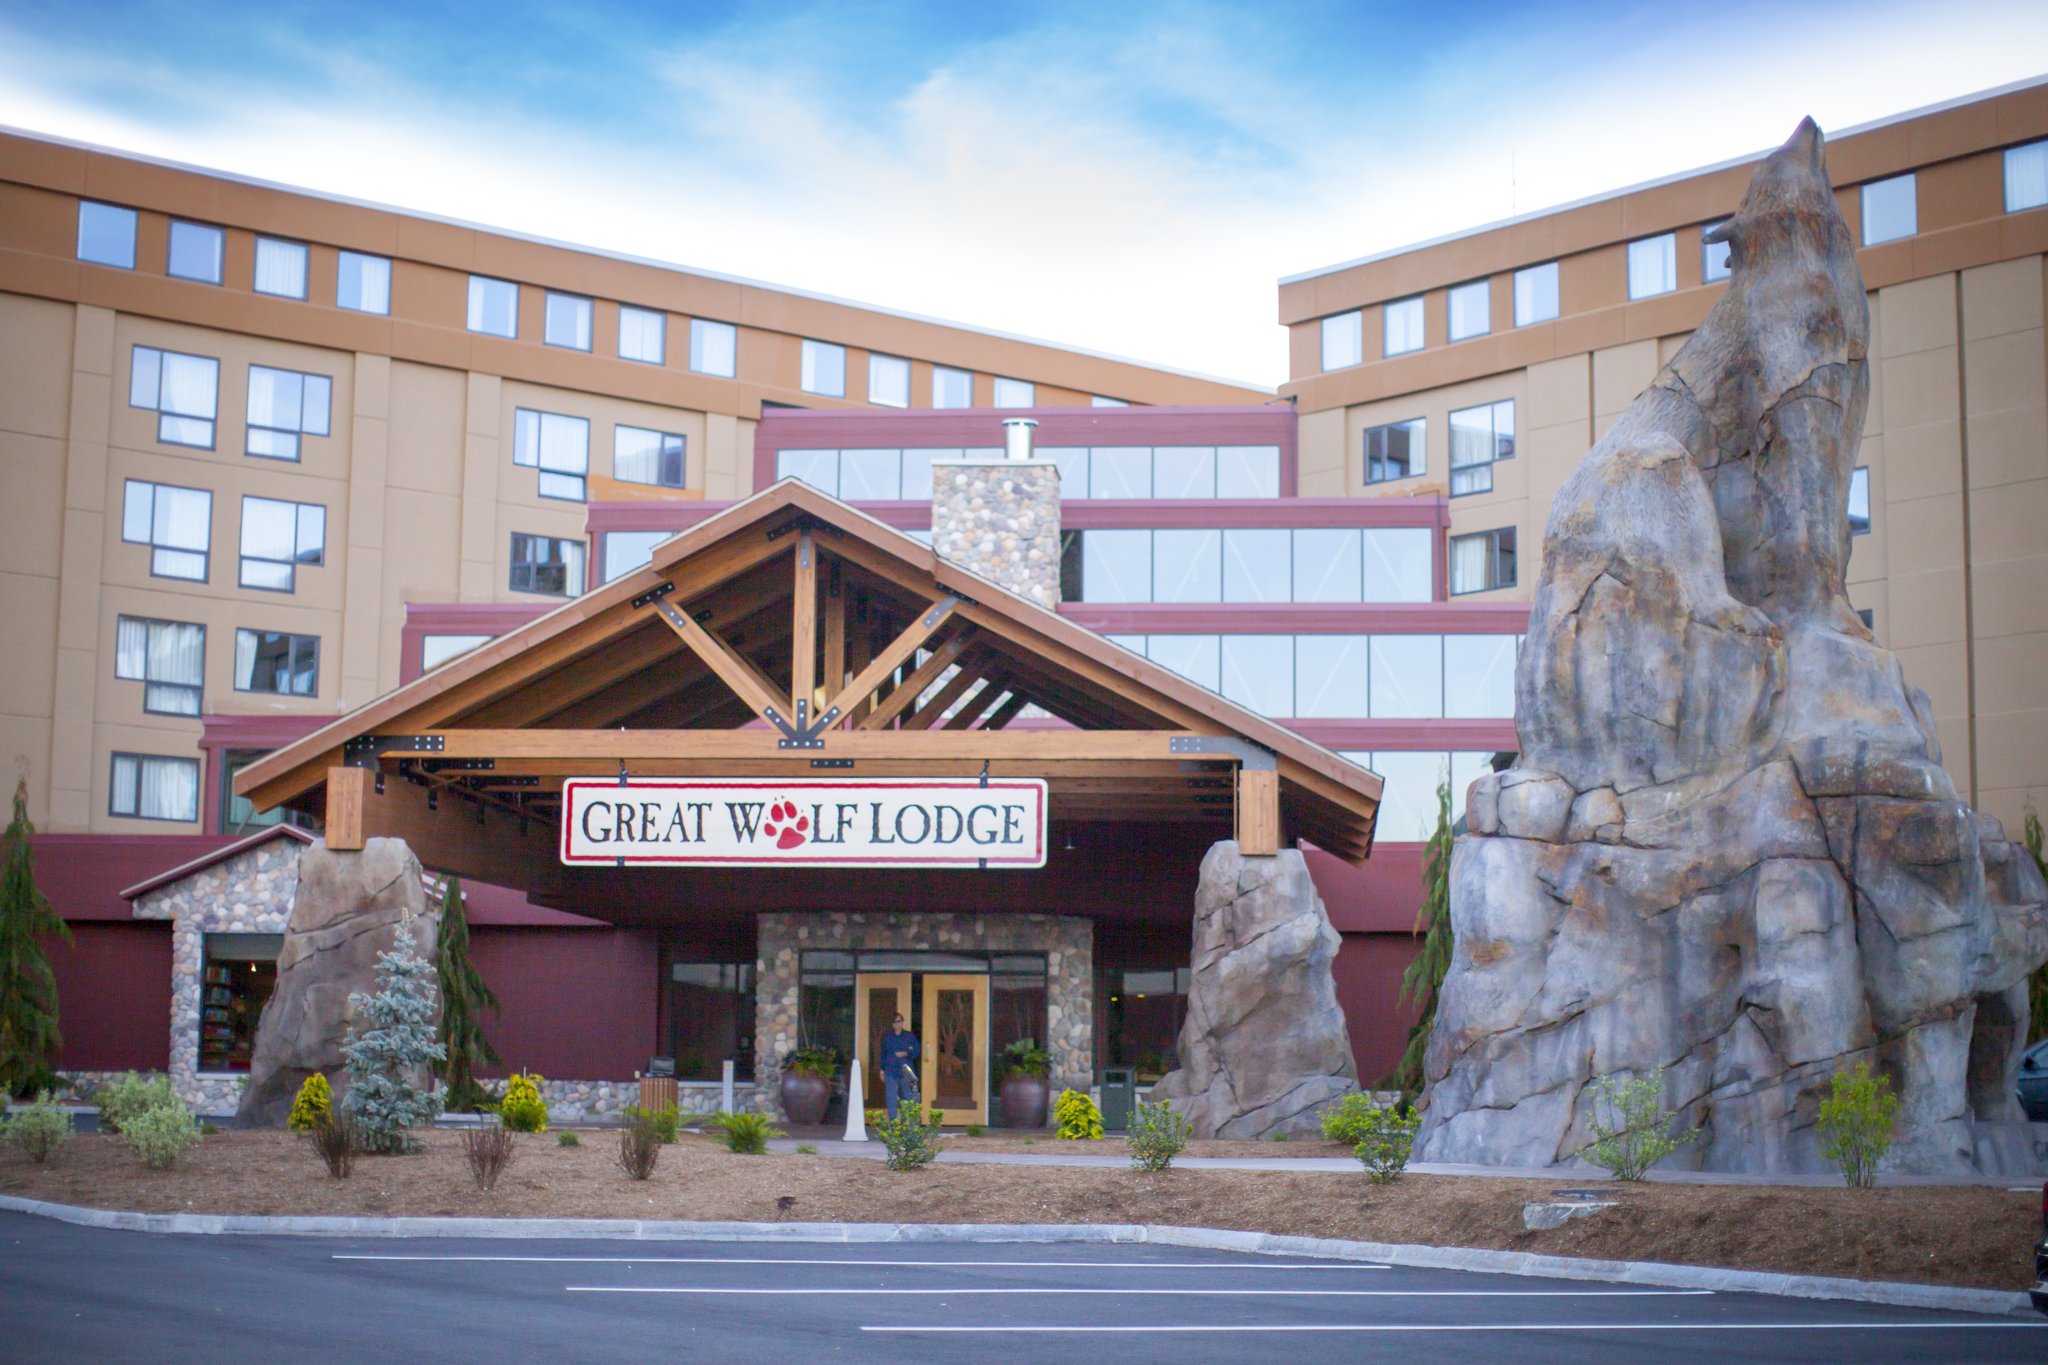 GREAT WOLF LODGE / NEW ENGLAND Fitchburg MA 150 Great Wolf 01420